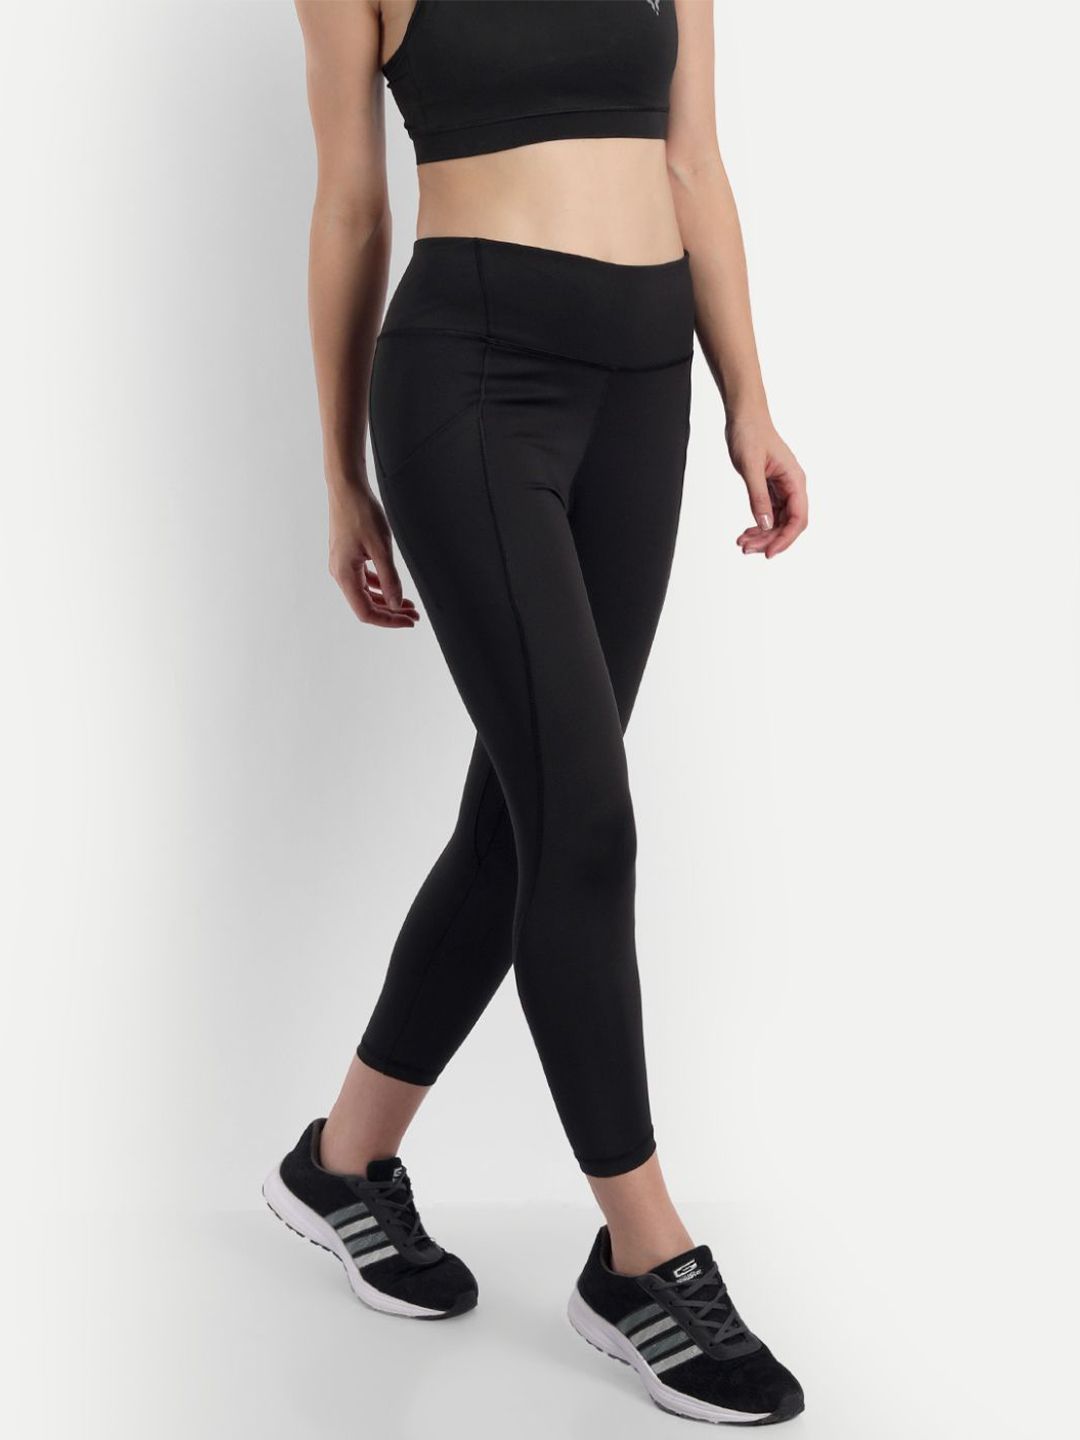 deb Women Black Solid High-Rise Sports Tights Price in India